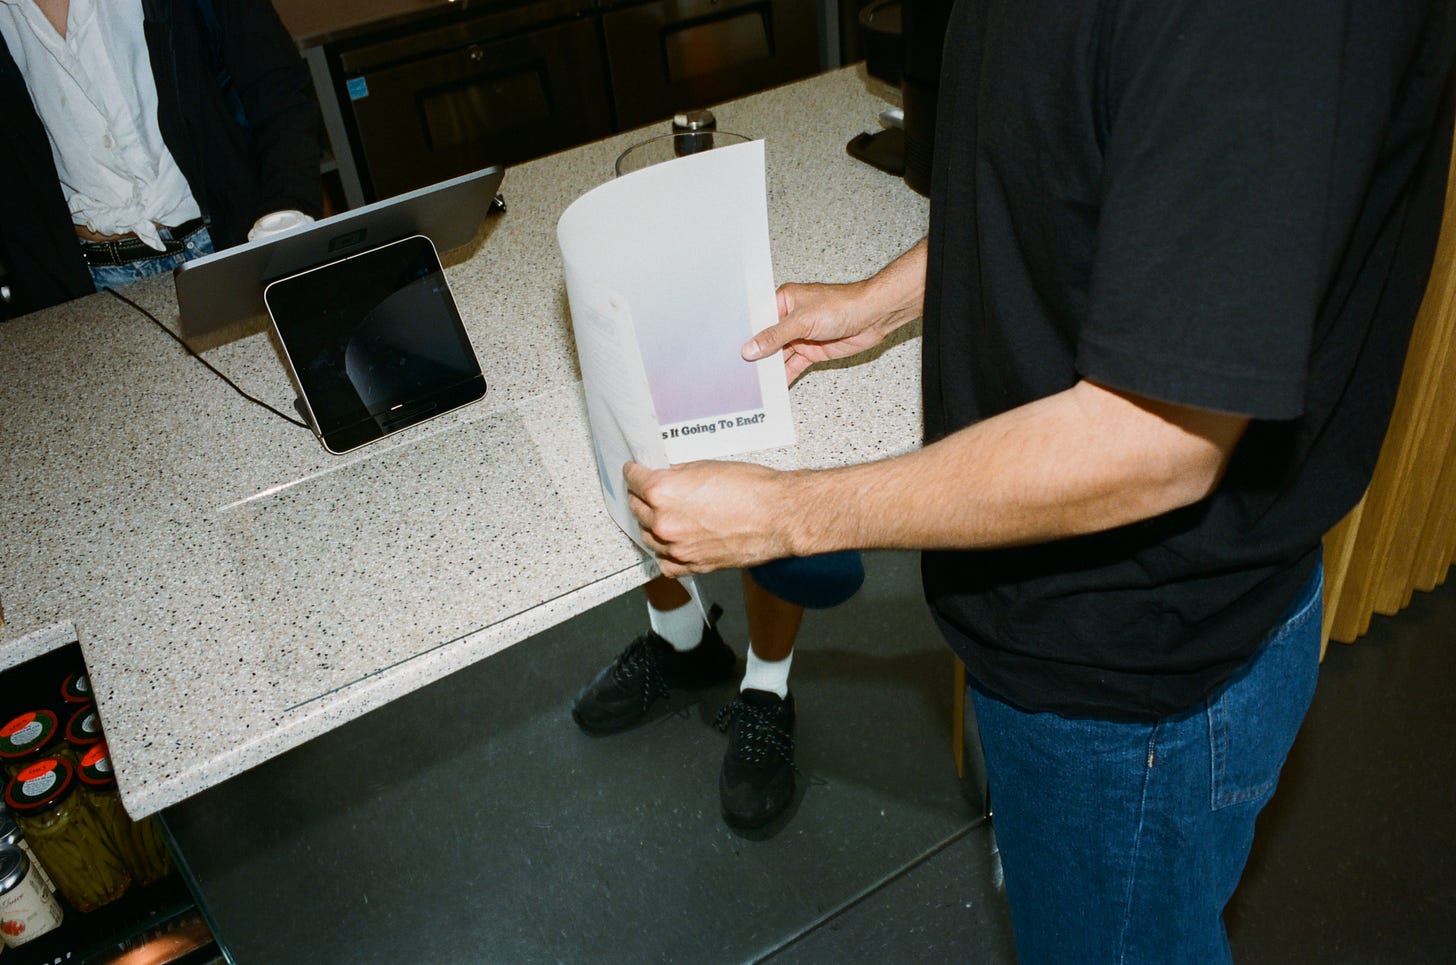 Matthew Chavarria removes the menu from its glass case